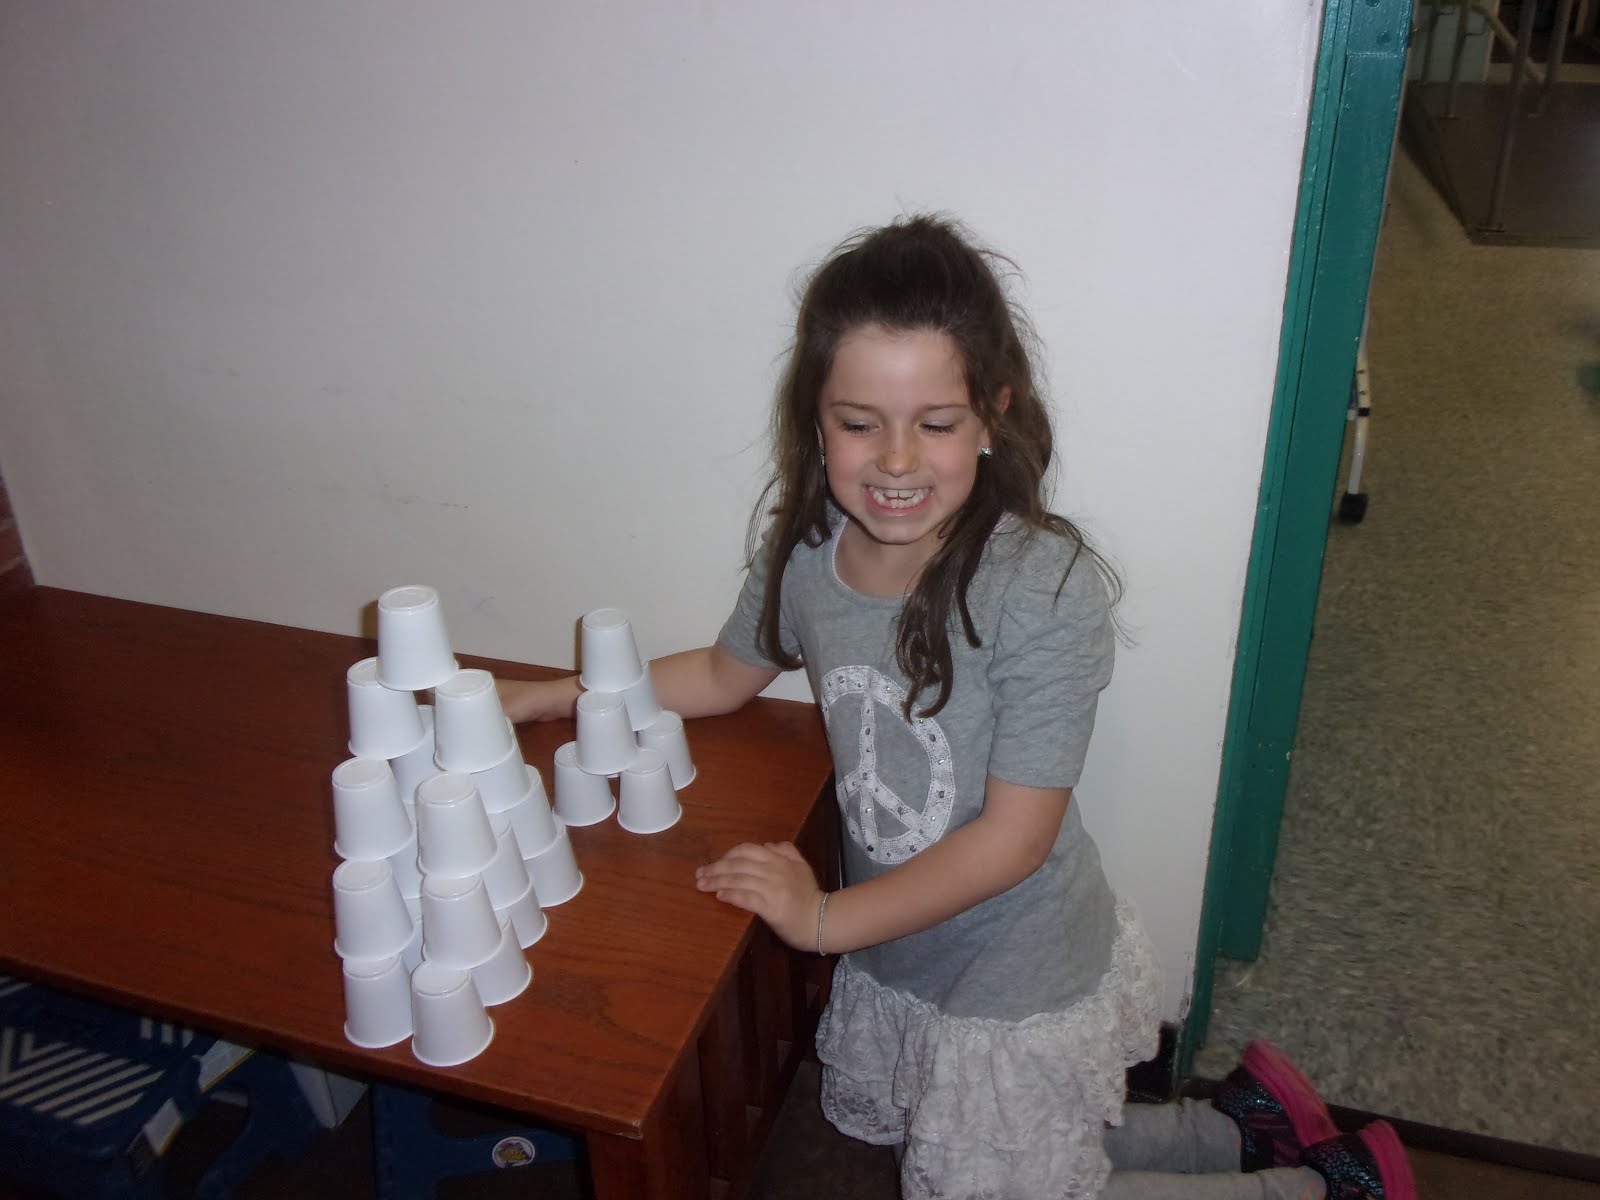 Cup Stacking-A Favorite